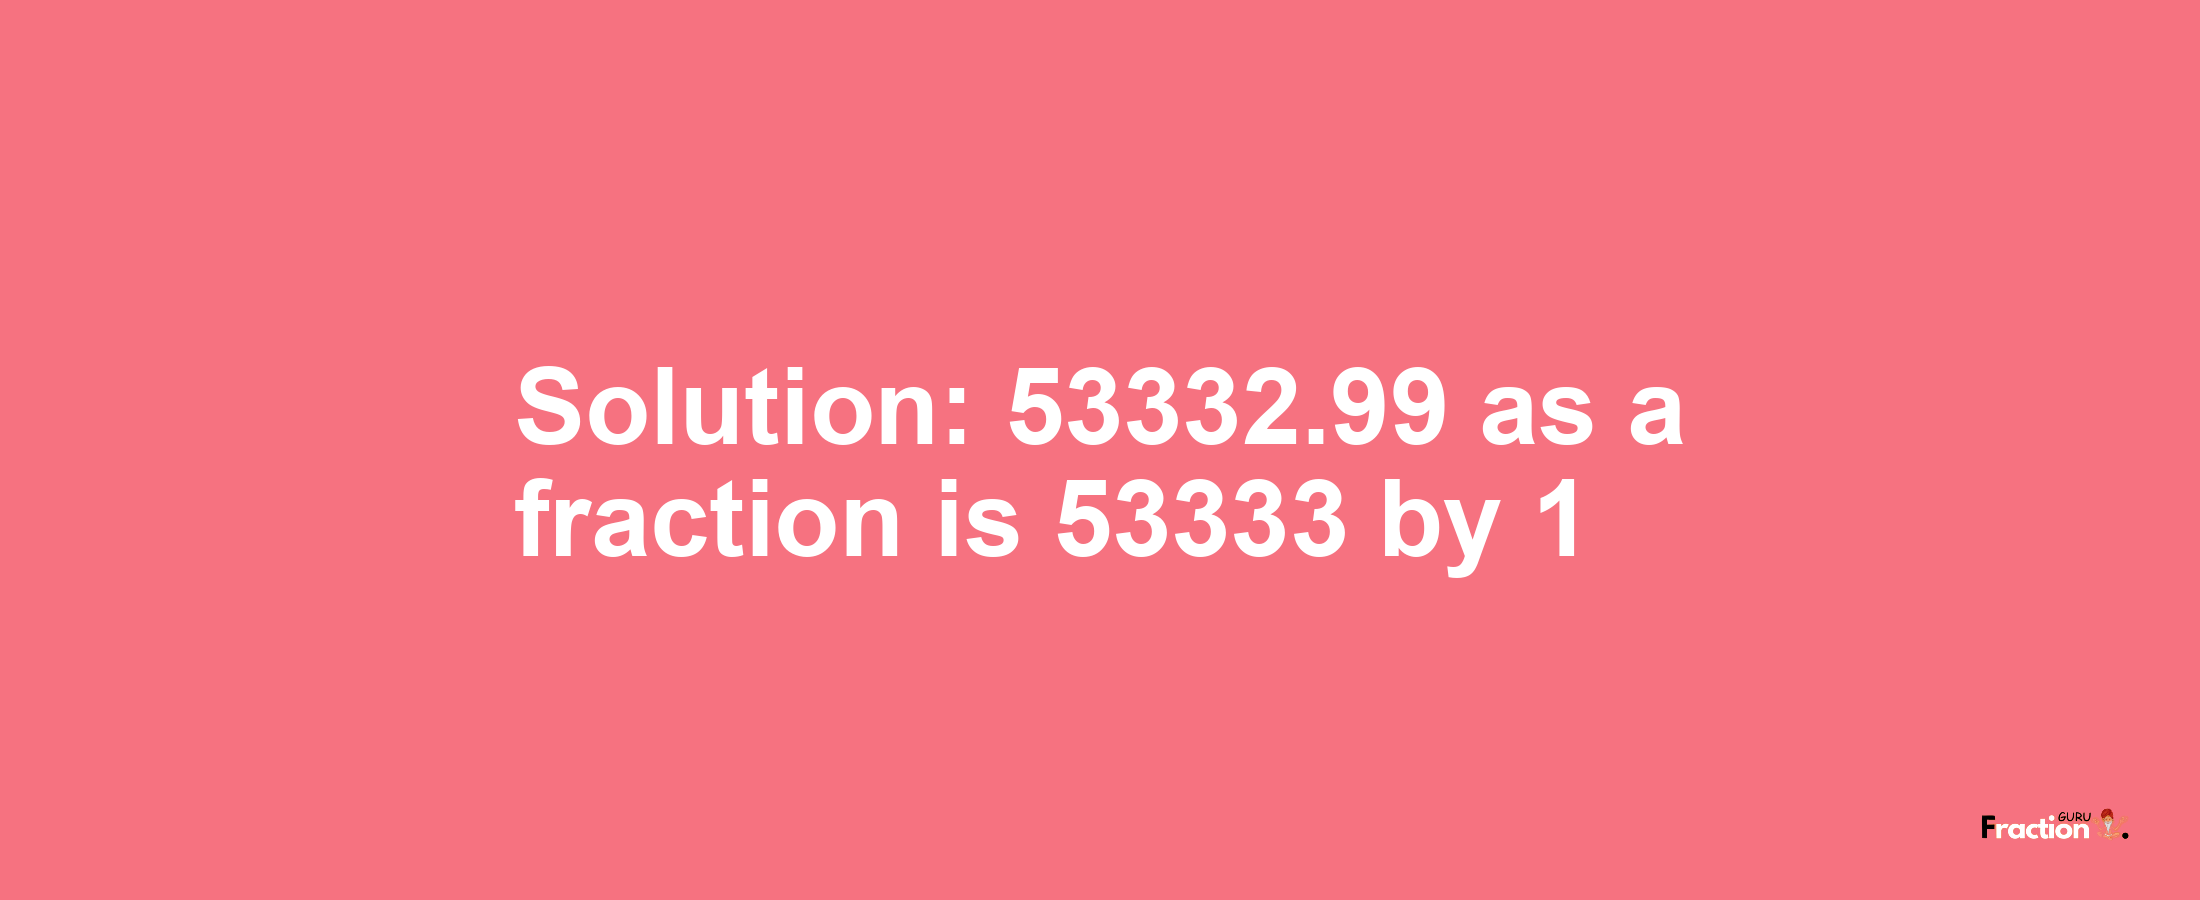 Solution:53332.99 as a fraction is 53333/1